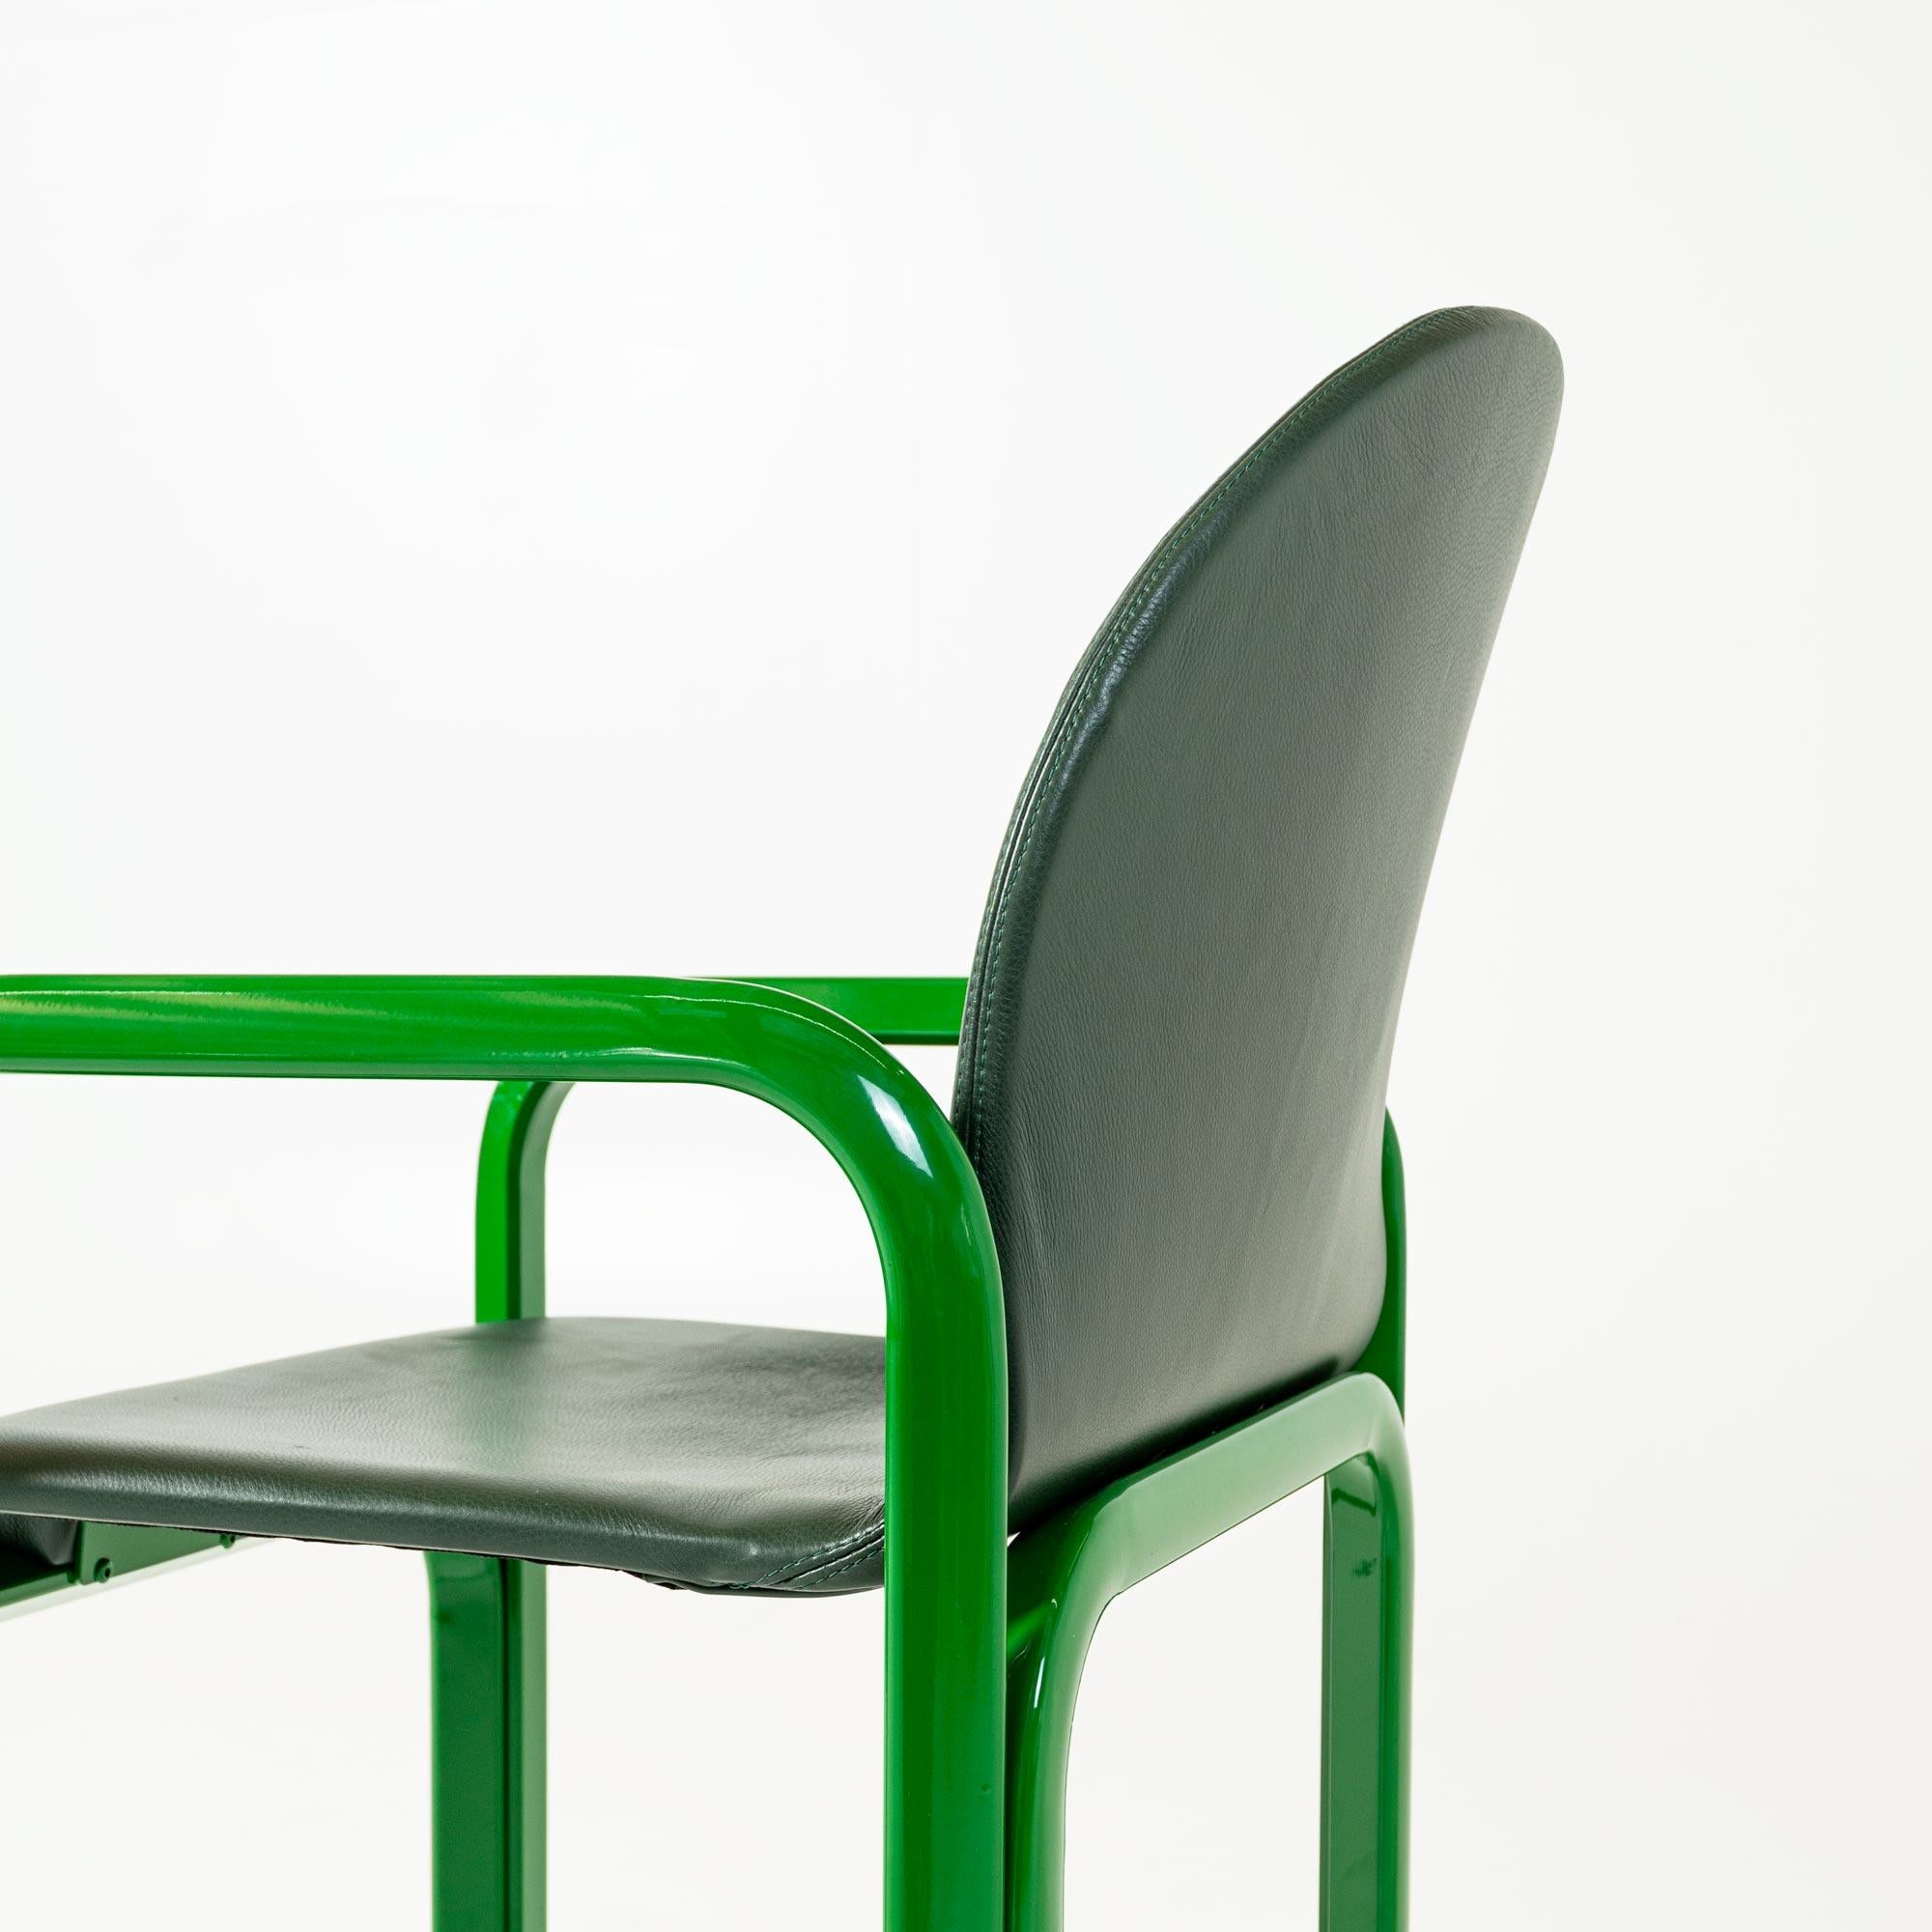 Late 20th Century Pair of Gae Aulenti Arm Chairs Model 54A in Tonal Green